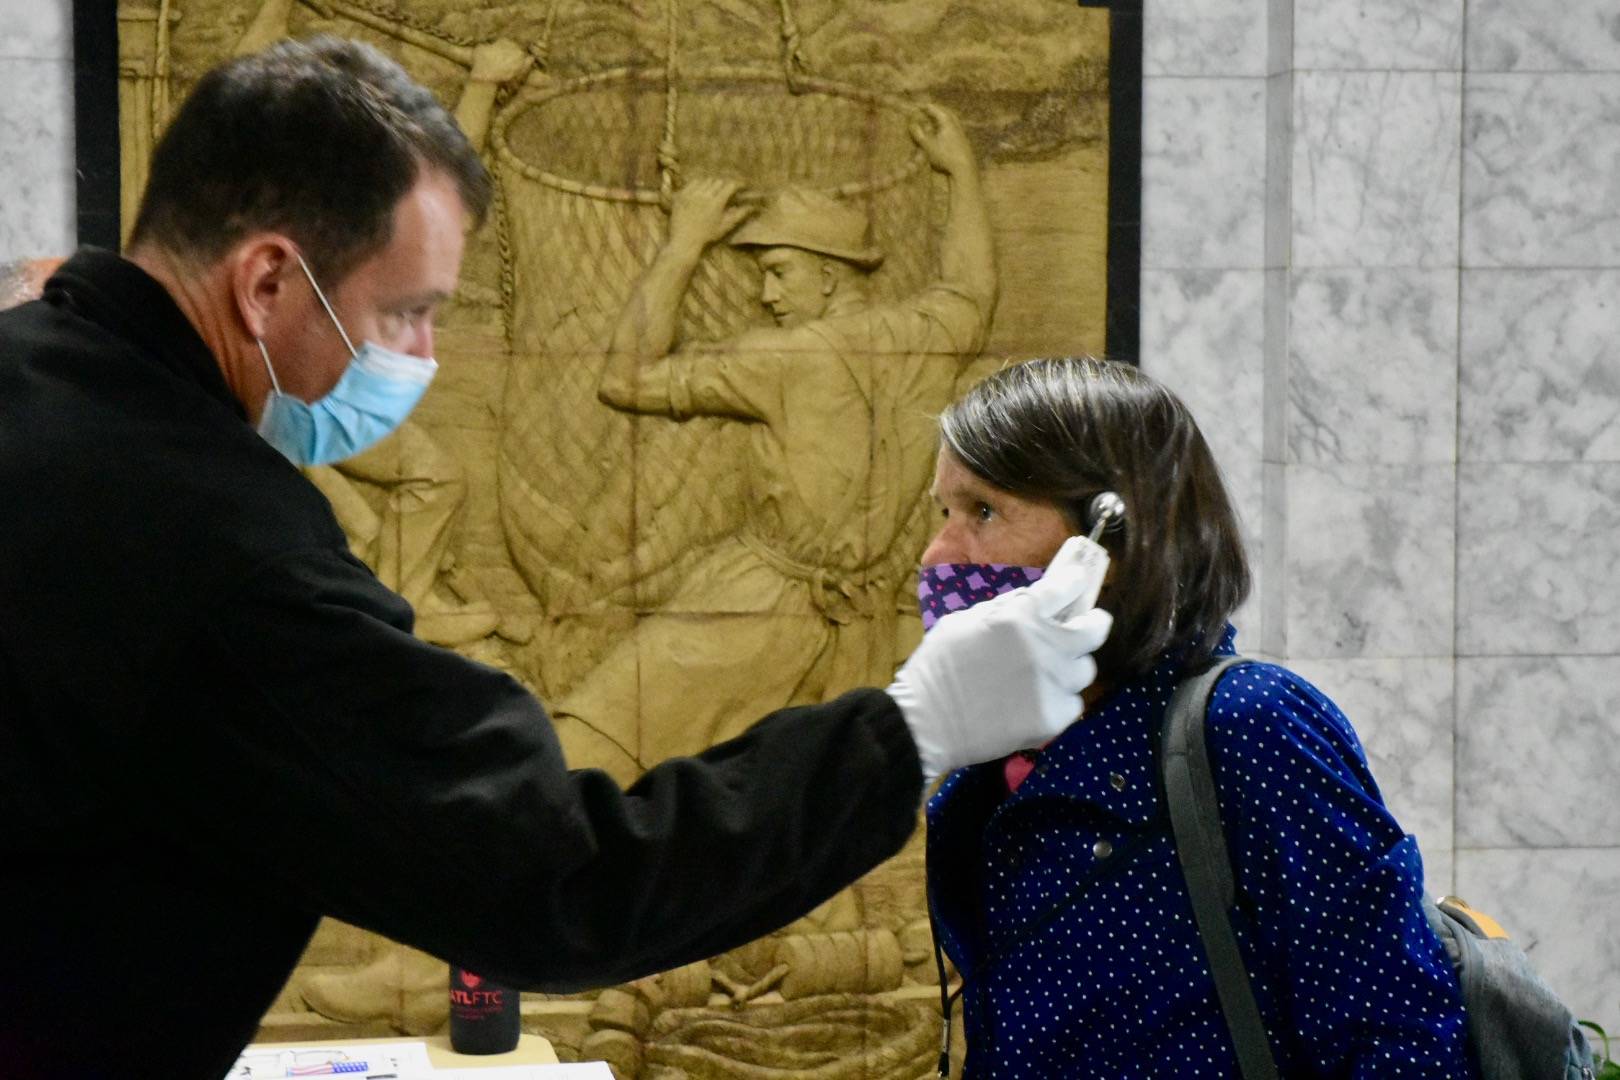 Rep. Jennifer Johnston, R-Anchorage, gets her temperature taken as she enters the Alaska State Capitol on Monday, May 18, 2020. (Peter Segall / Juneau Empire File)